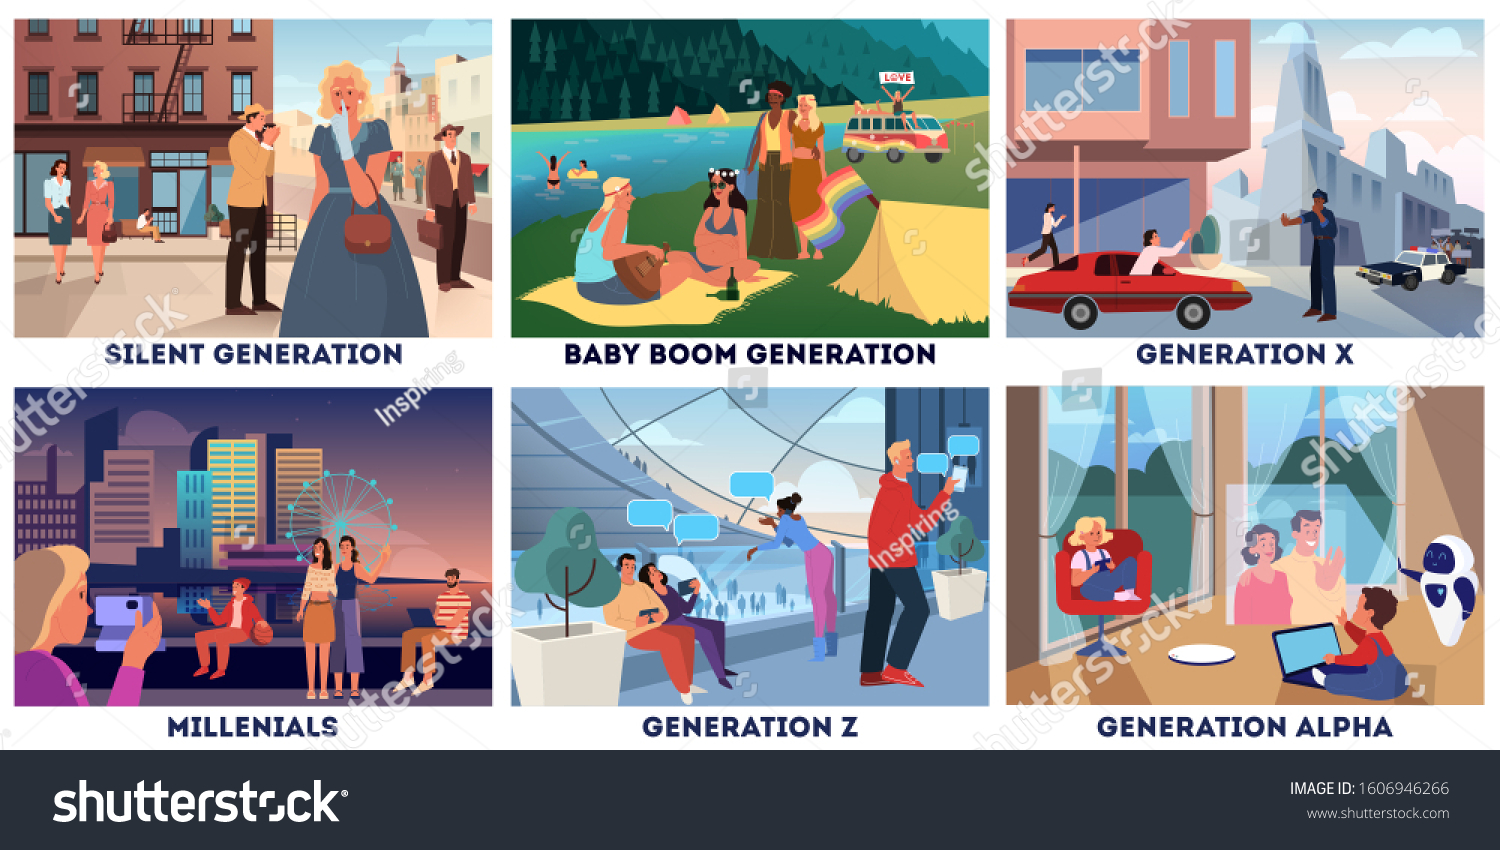 Various generations representation set. Social groups concept, generation type. Silent, boomer, x, millenial, z and alpha. Set of vector illustration #1606946266